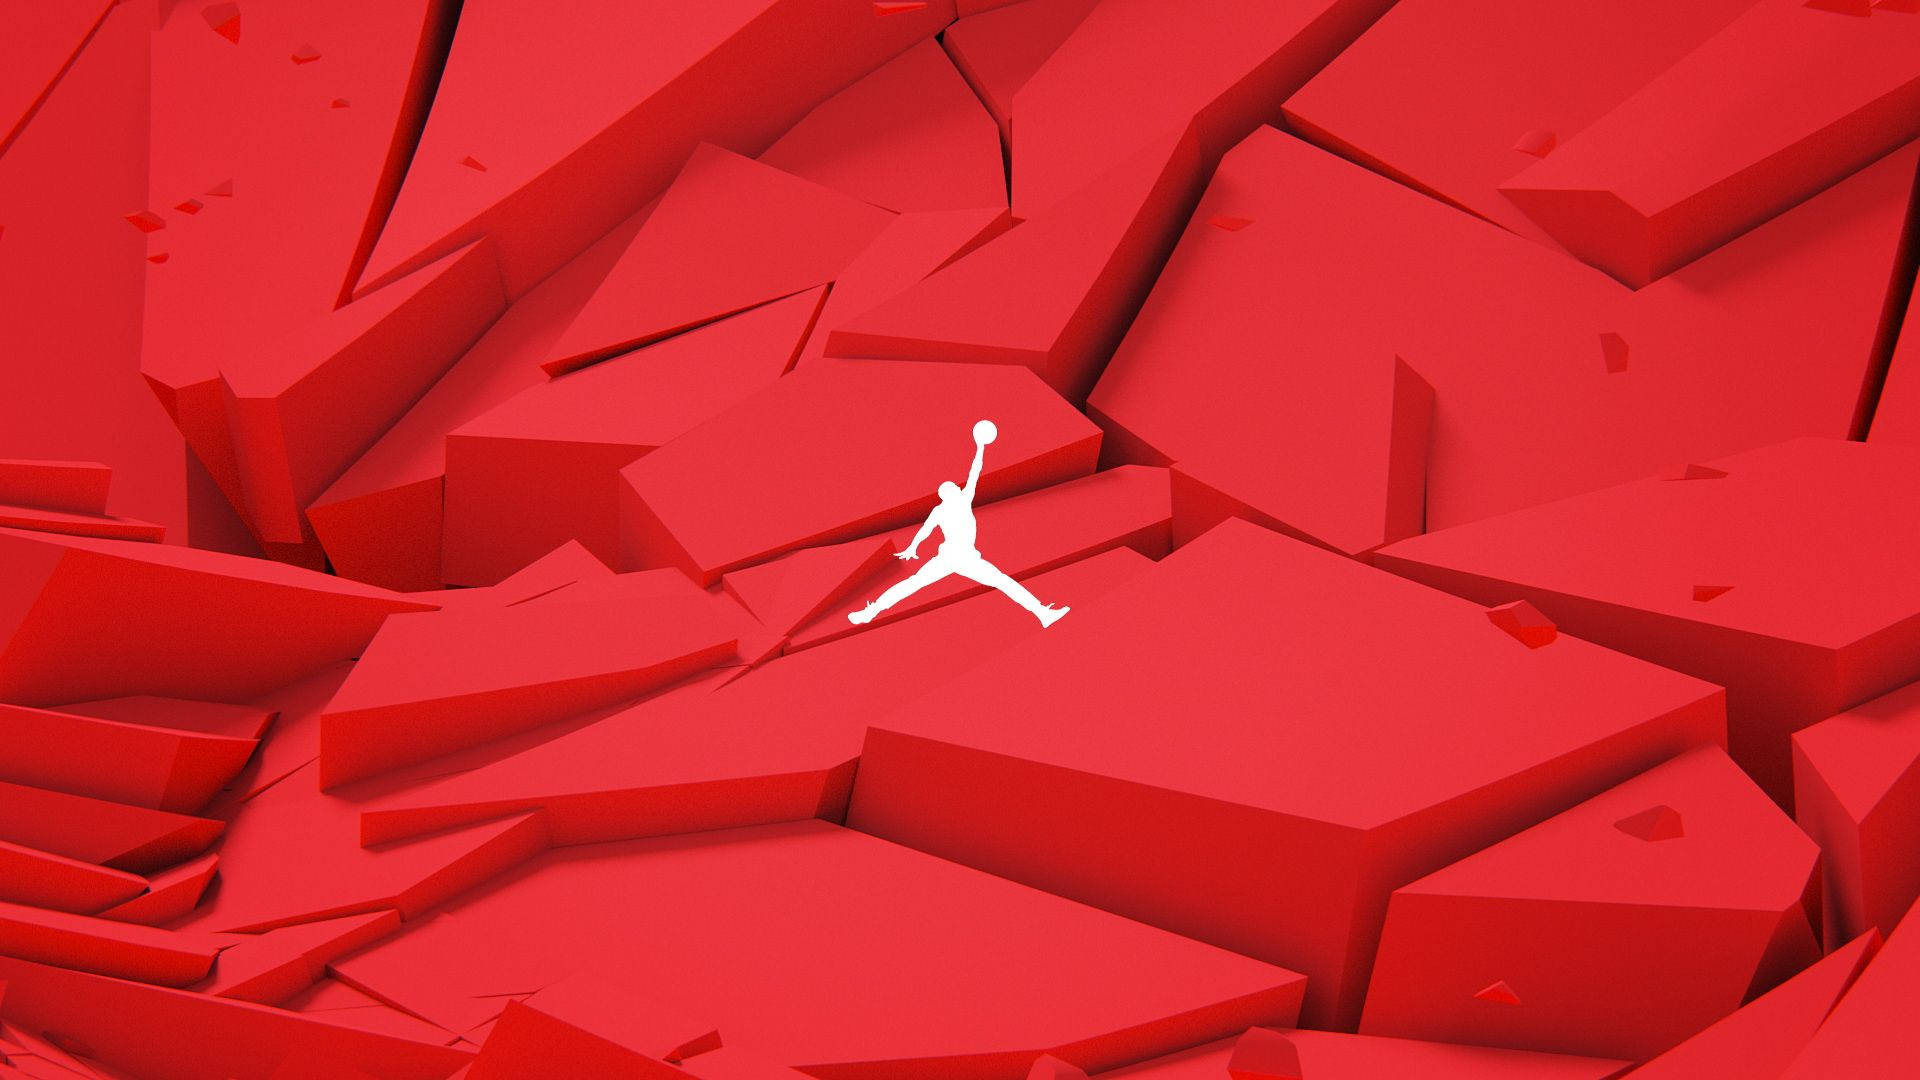 Air Jordan Abstract Red Shapes Background